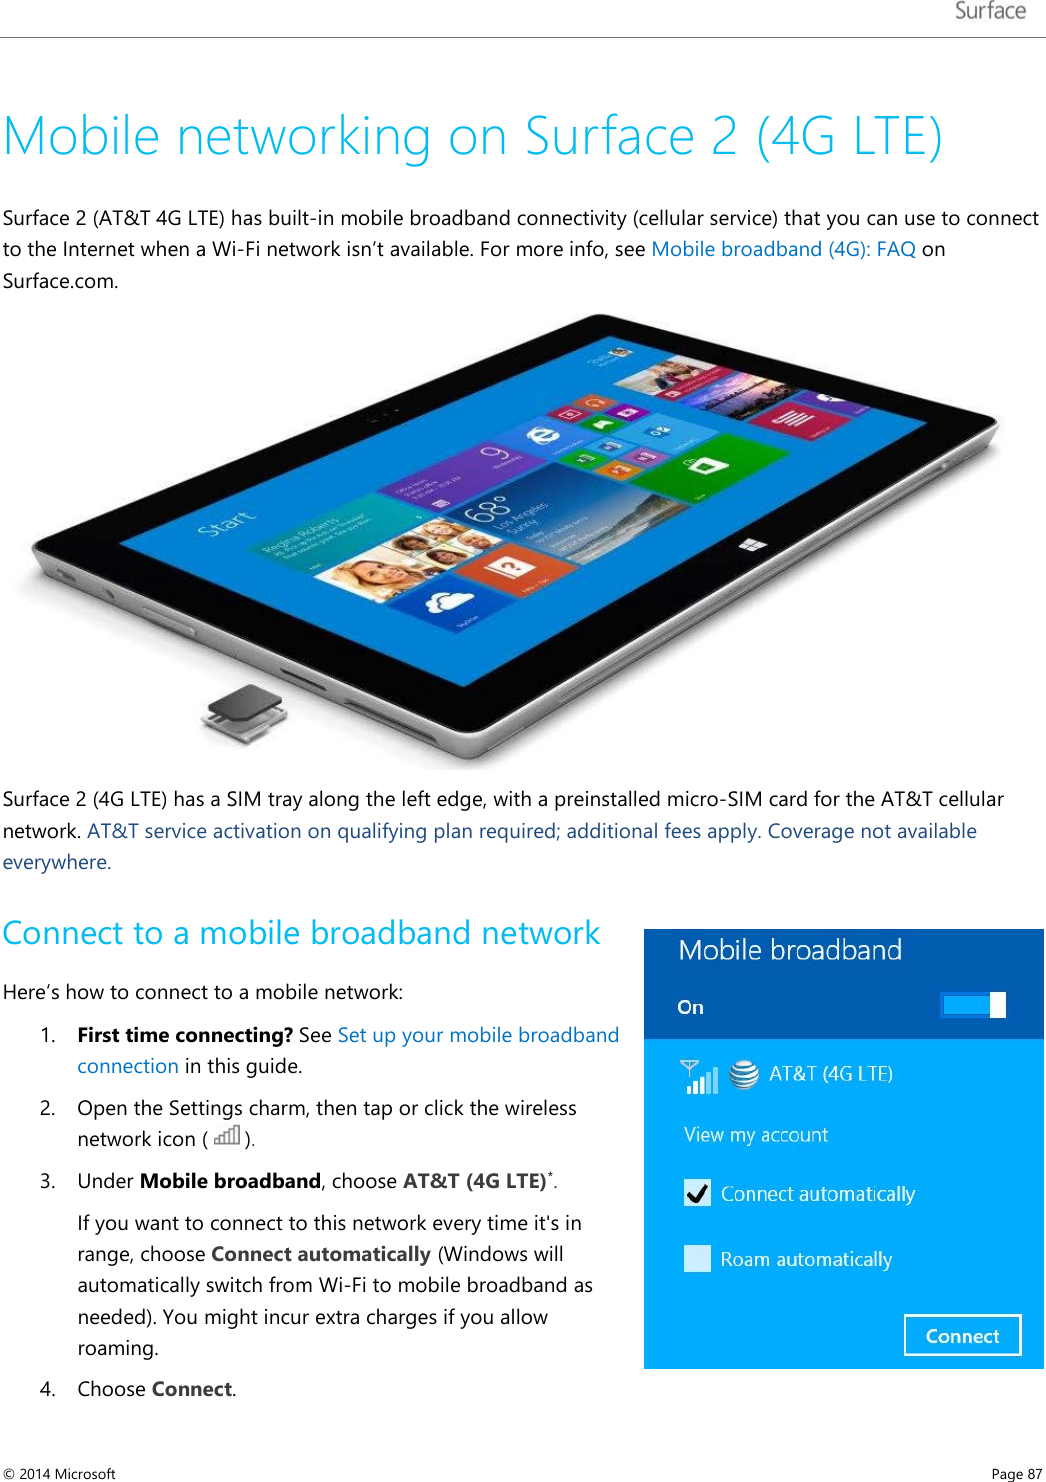   Mobile networking on Surface 2 (4G LTE)  Surface 2 (AT&amp;T 4G LTE) has built-in mobile broadband connectivity (cellular service) that you can use to connect to the Internet when a Wi-Fi network isn’t available. For more info, see Mobile broadband (4G): FAQ on Surface.com.  Surface 2 (4G LTE) has a SIM tray along the left edge, with a preinstalled micro-SIM card for the AT&amp;T cellular network. AT&amp;T service activation on qualifying plan required; additional fees apply. Coverage not available everywhere. Connect to a mobile broadband network  Here’s how to connect to a mobile network: 1. First time connecting? See Set up your mobile broadband connection in this guide.  2. Open the Settings charm, then tap or click the wireless network icon (   ).  3. Under Mobile broadband, choose AT&amp;T (4G LTE)*. If you want to connect to this network every time it&apos;s in range, choose Connect automatically (Windows will automatically switch from Wi-Fi to mobile broadband as needed). You might incur extra charges if you allow roaming.  4. Choose Connect.  © 2014 Microsoft     Page 87  